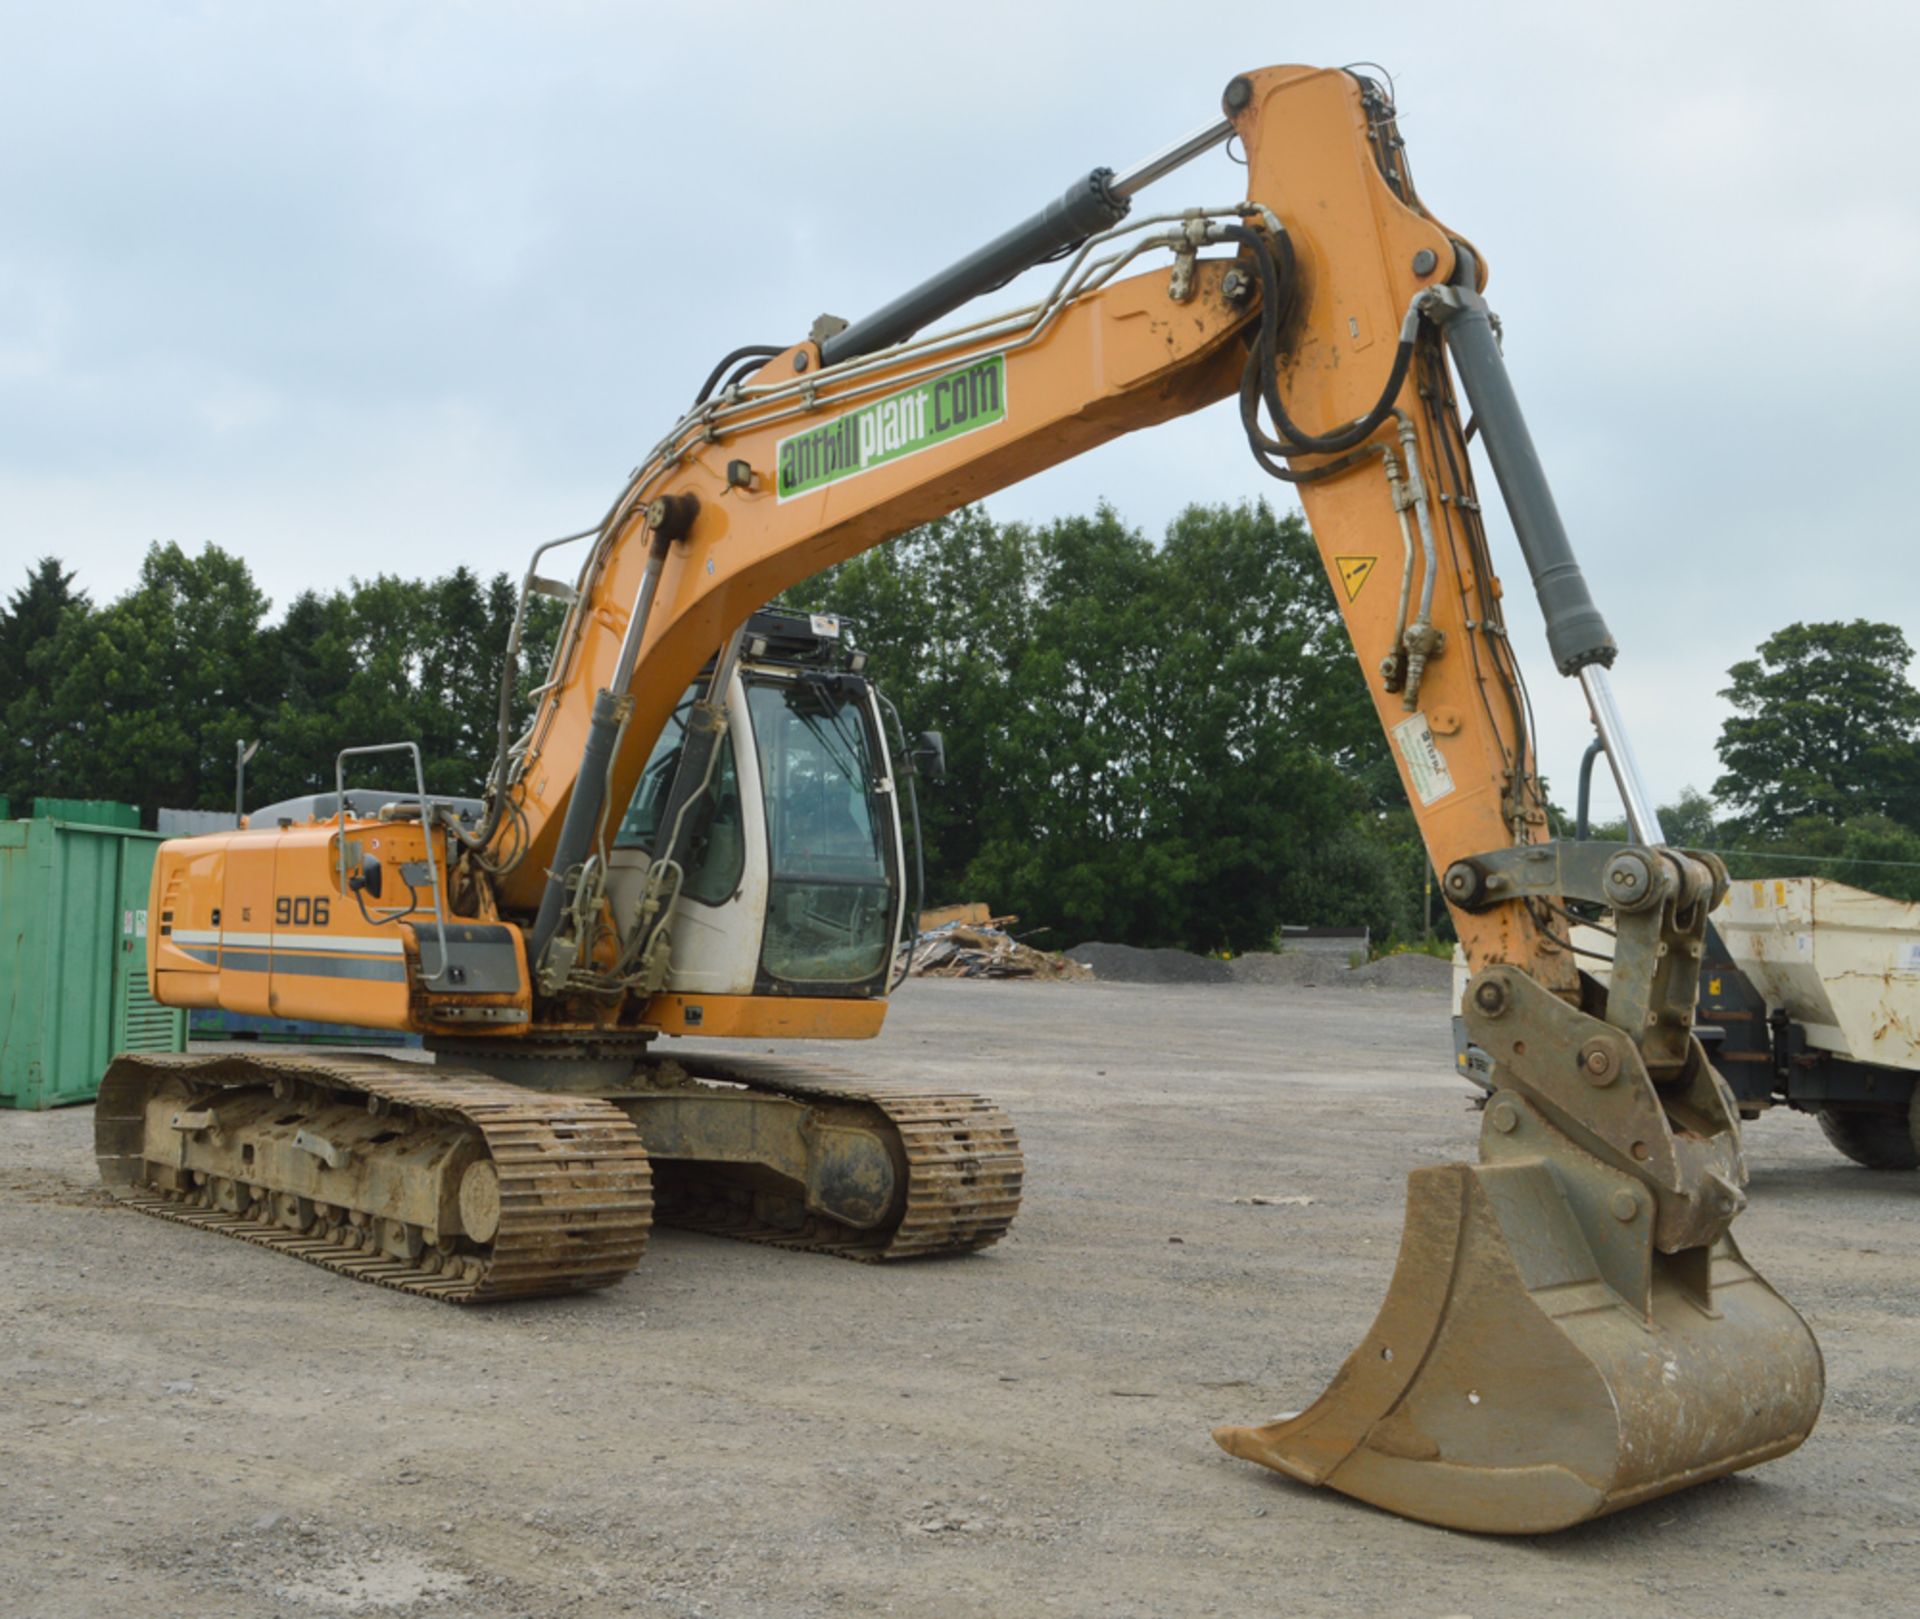 Liebherr R906 LC Litronic 23 tonne steel tracked excavator  Year: 2013 S/N: WLHZ1283JZCO37687 - Image 4 of 14